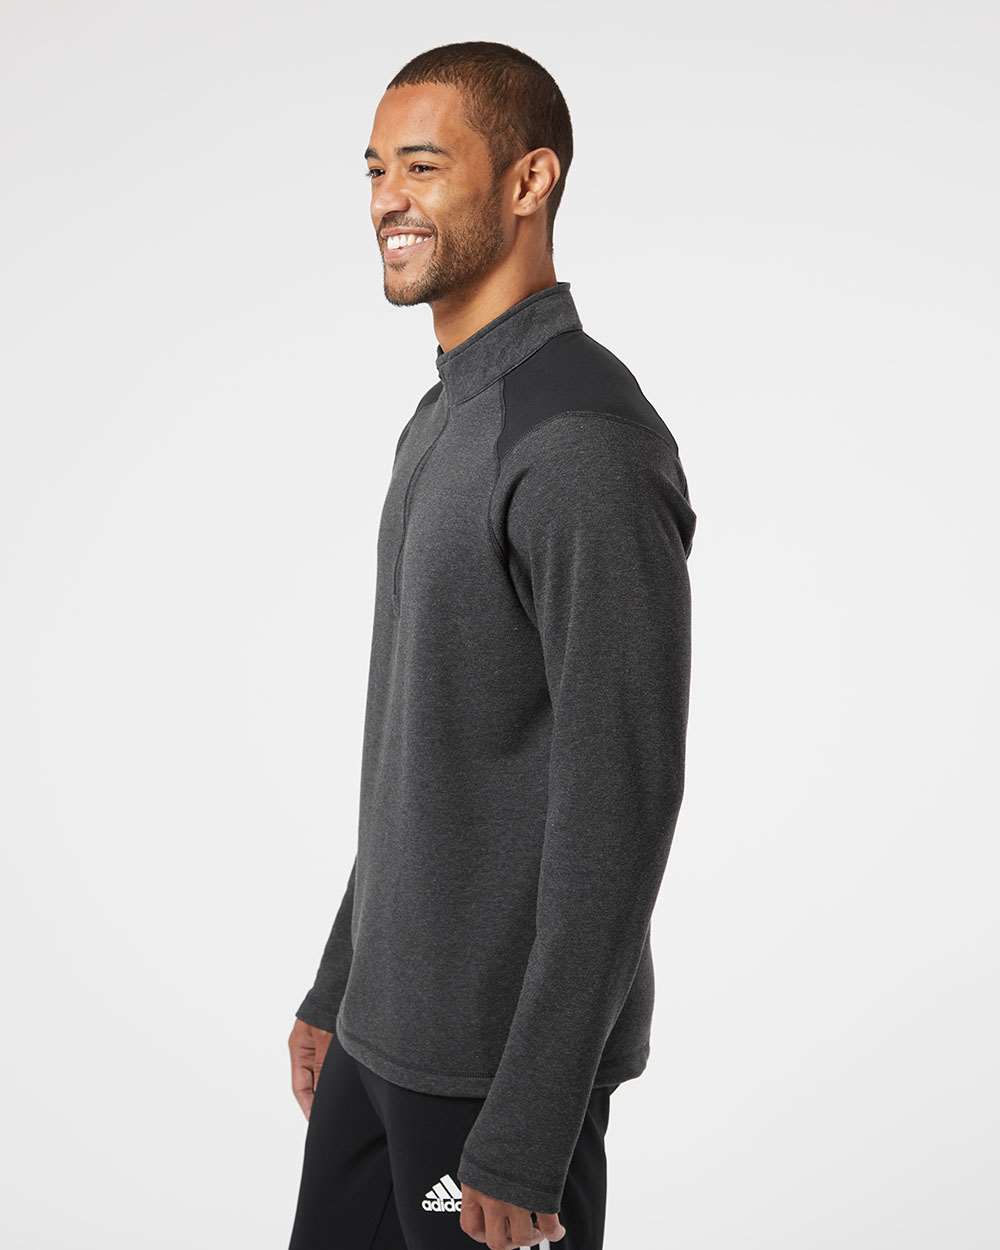 Adidas - Heathered Quarter-Zip Pullover with Colorblocked Shoulders - A463